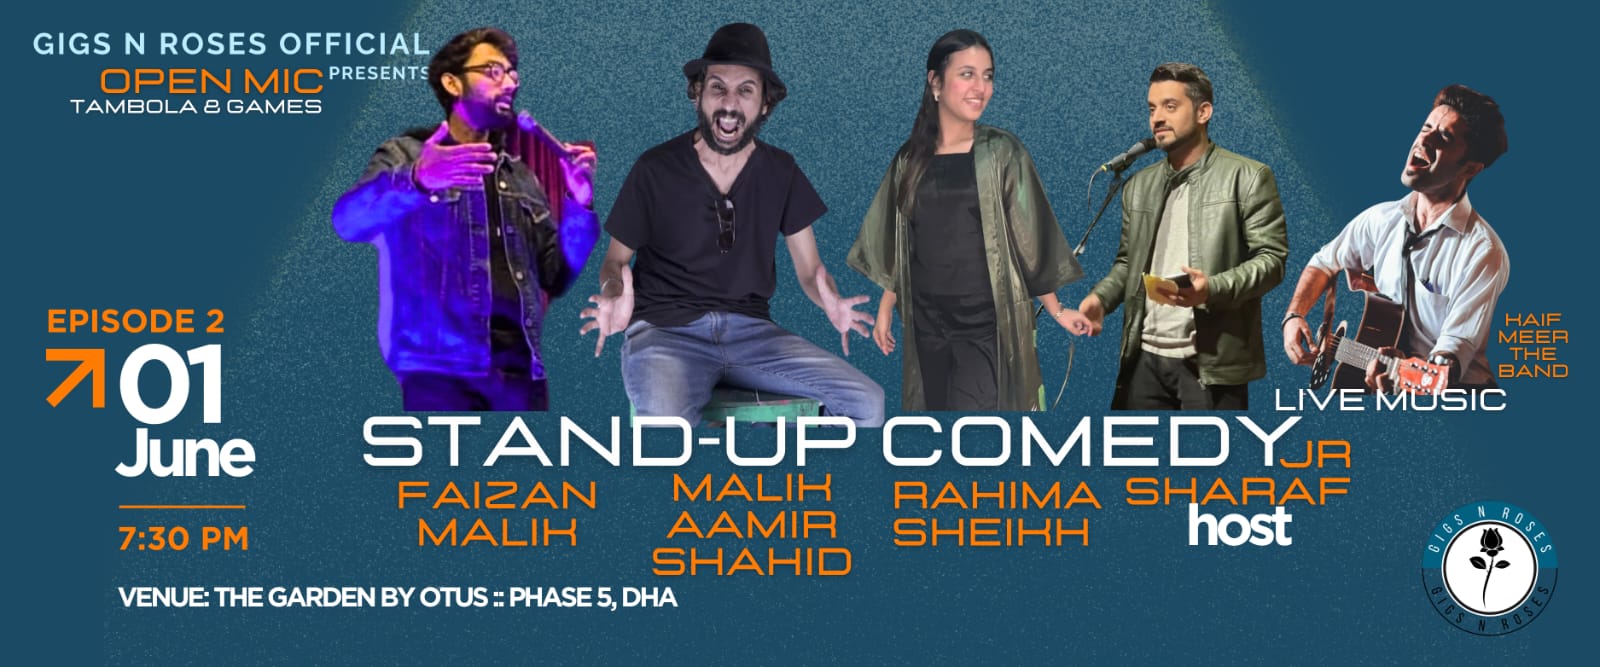 Stand-up Comedy and Live Music